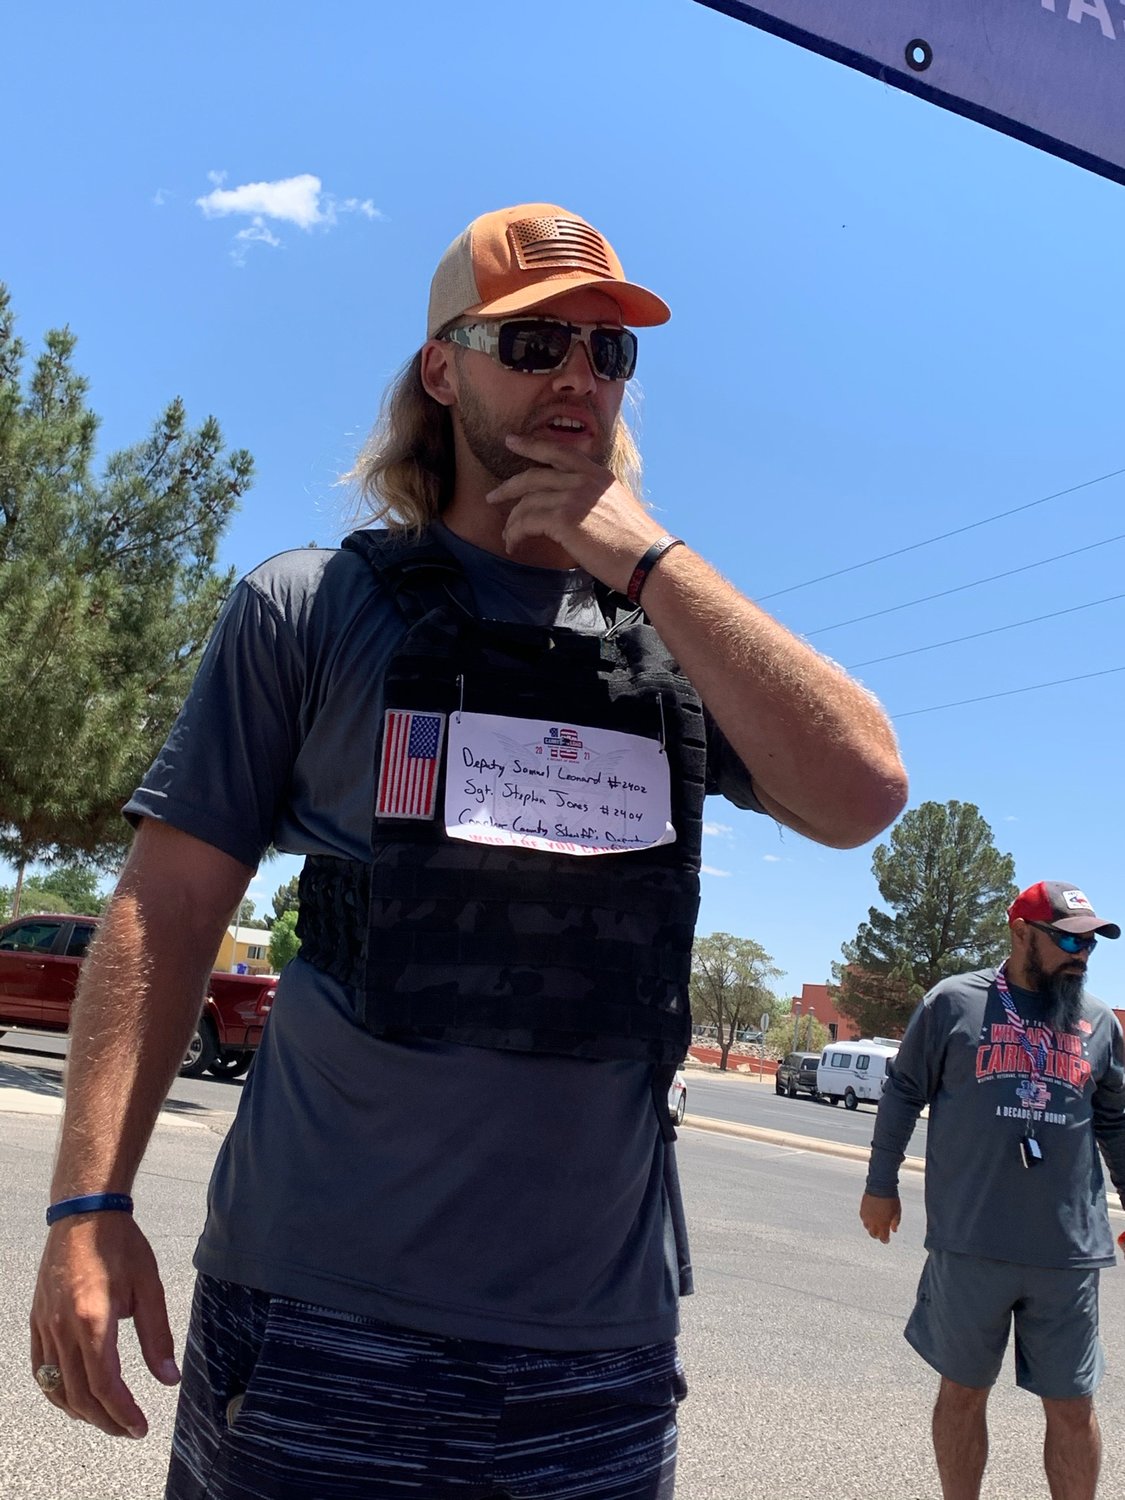 Jason Diggins, participating in one of the Las Cruces legs of Carry the Load relay, is wearing a bib with the names of two sheriff’s department officers who lost their lives in the line of duty.